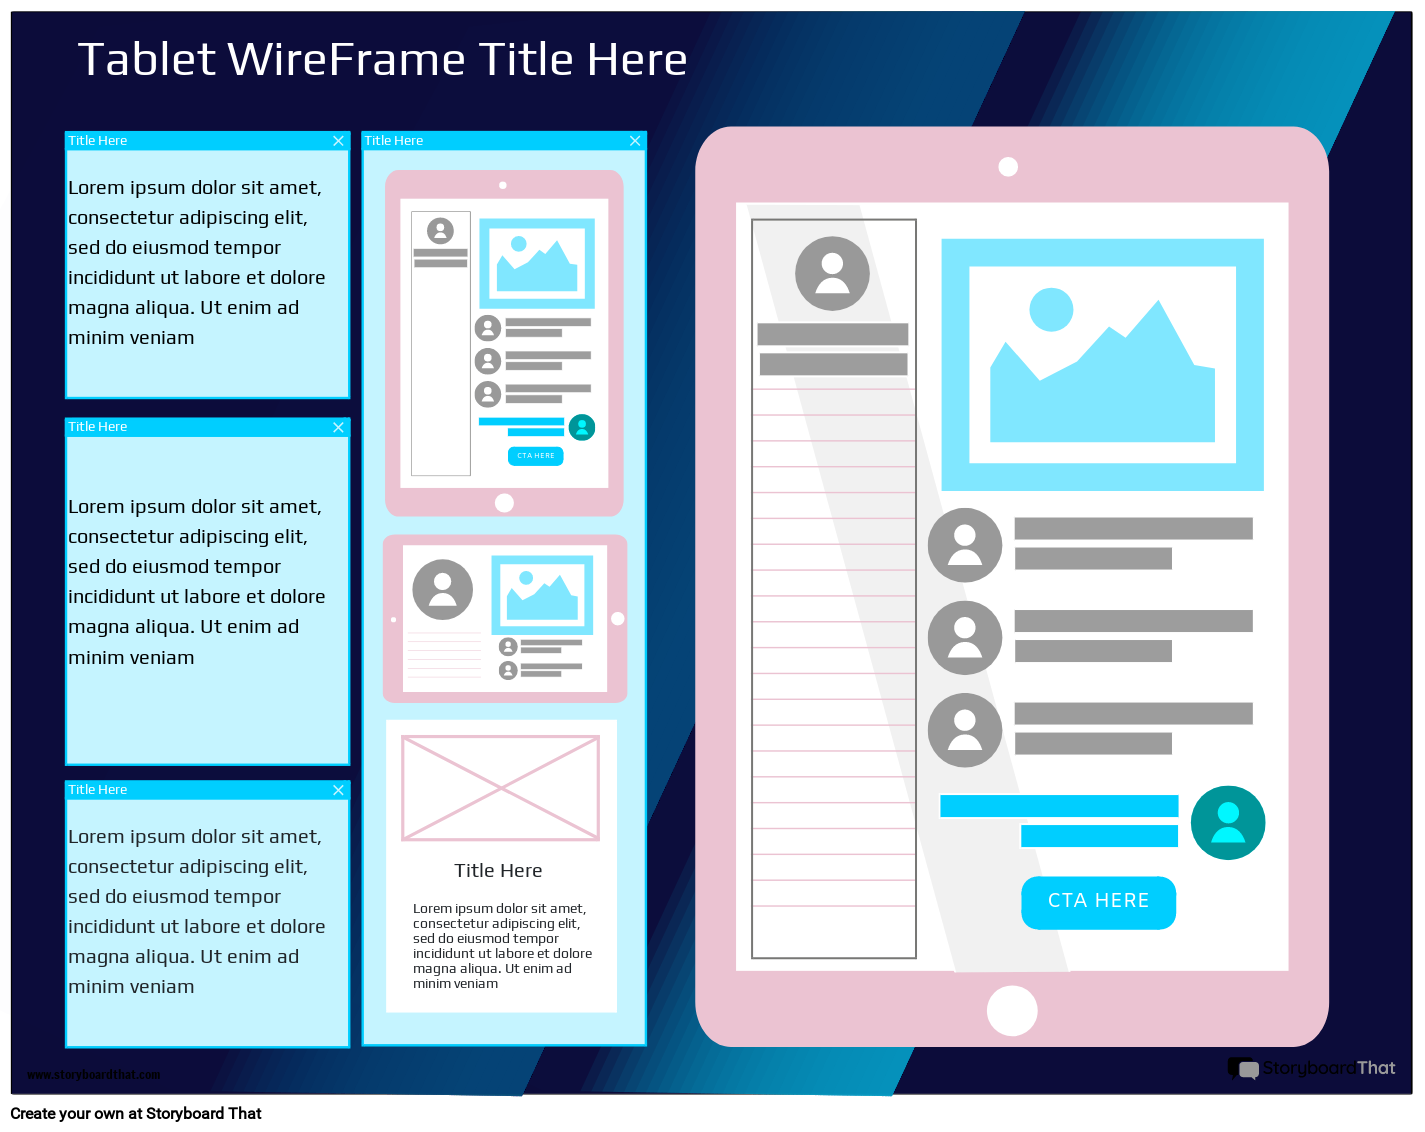 Corporate Tablet WireFrame Template 1